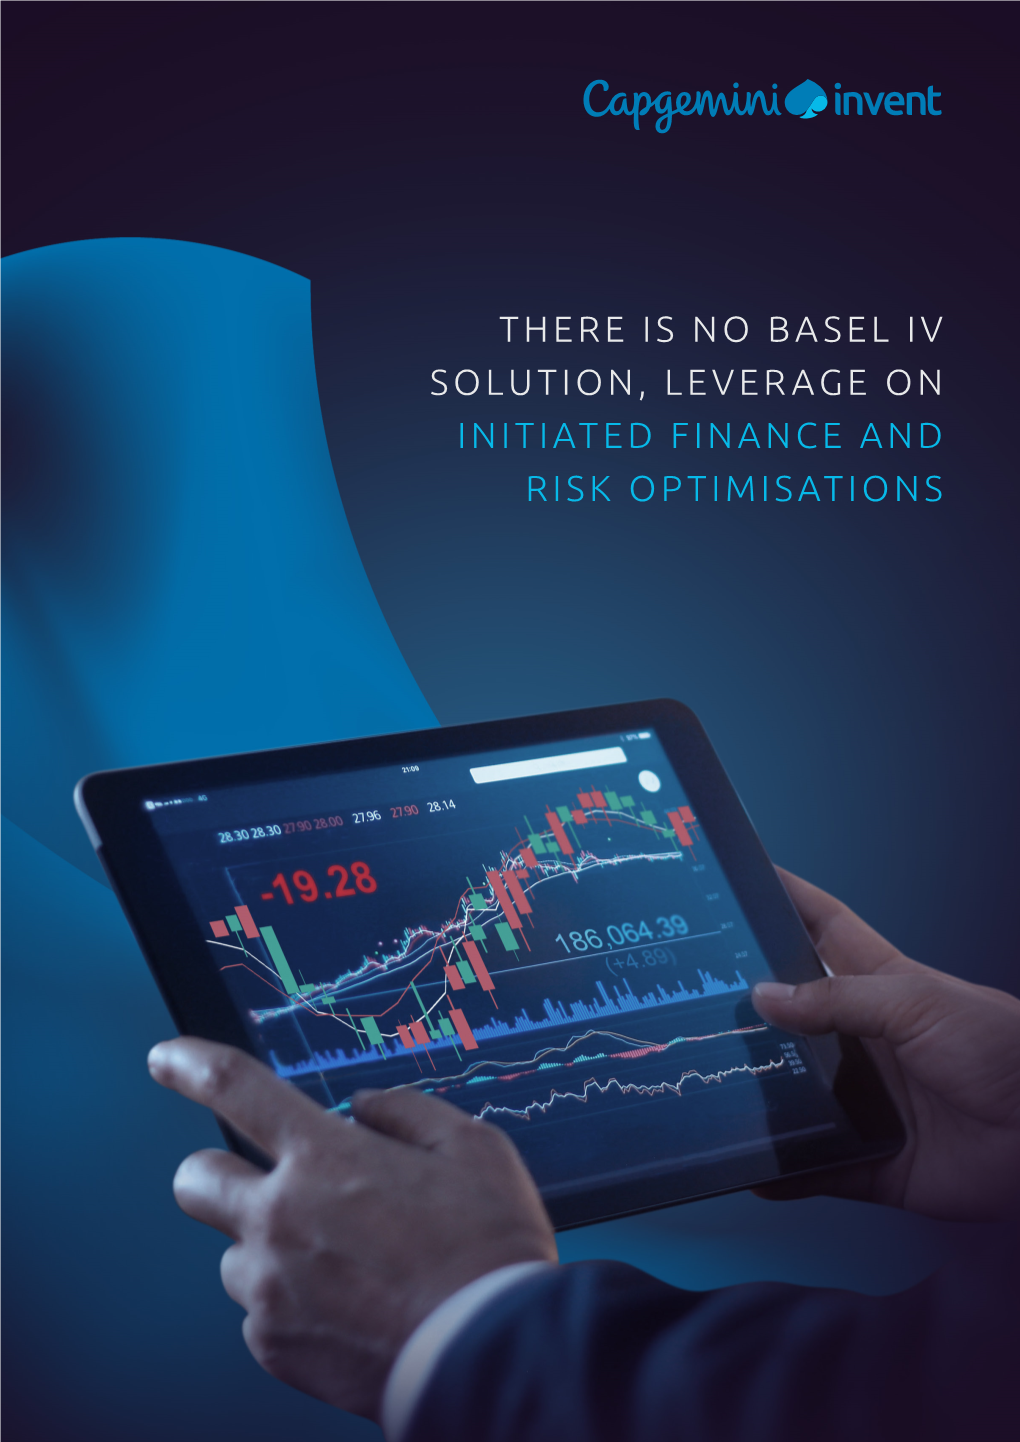 There Is No Basel Iv Solution, Leverage on Initiated Finance and Risk Optimisations 2 1